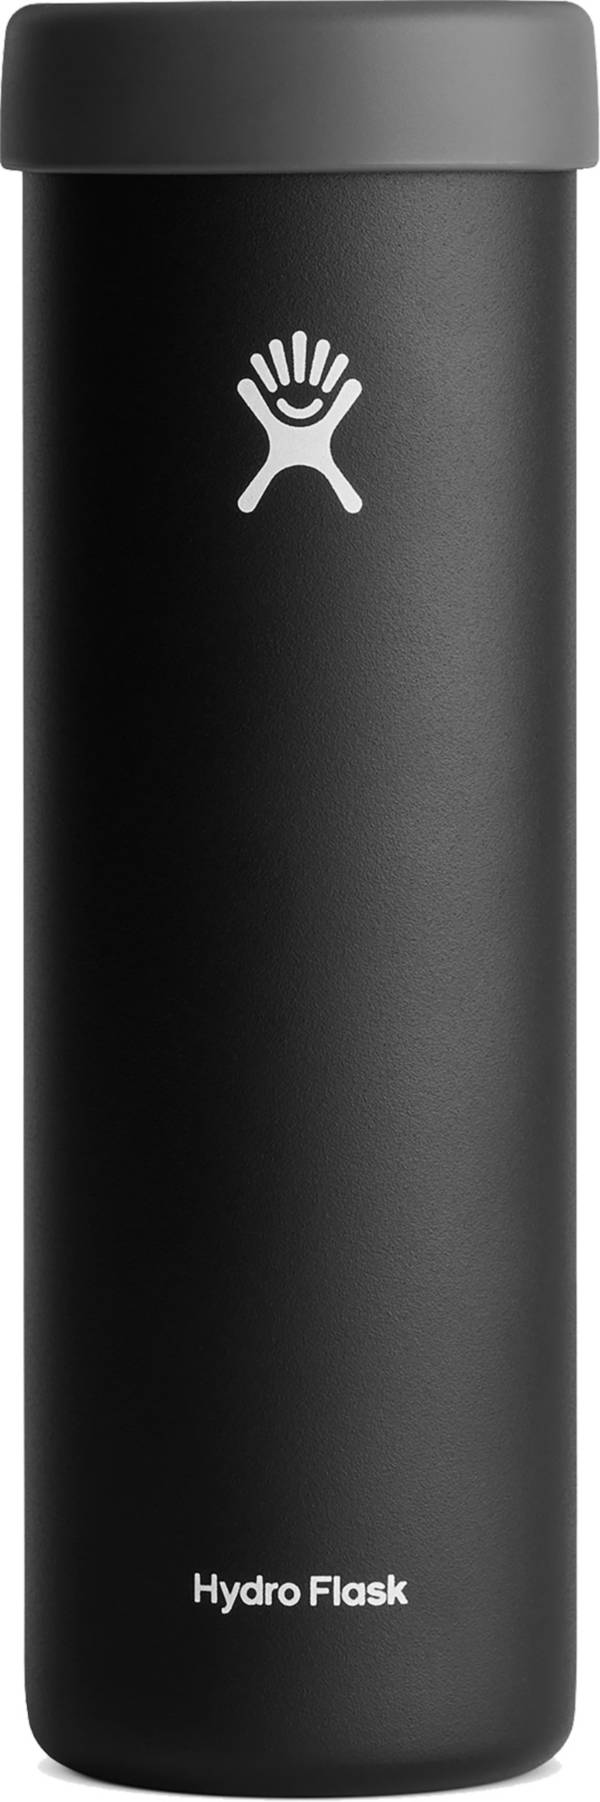 OAKLAND RAIDERS DOUBLEWALL STAINLESS STEEL THERMOS – LARGE - Black Diamond  Variety